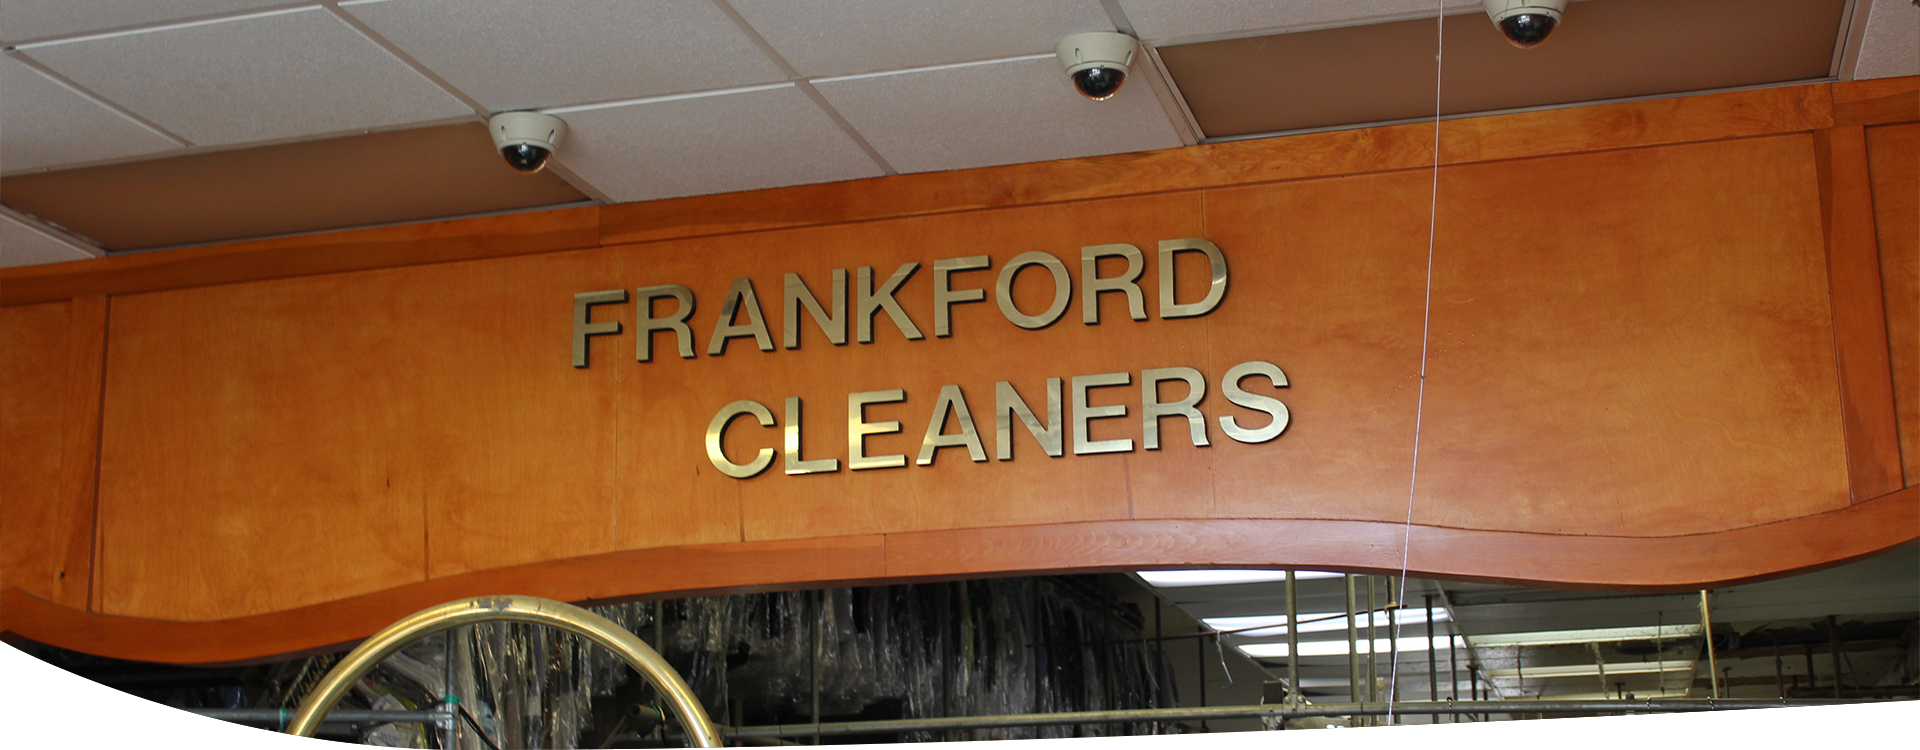 Frankford Cleaners in Thorndale, PA